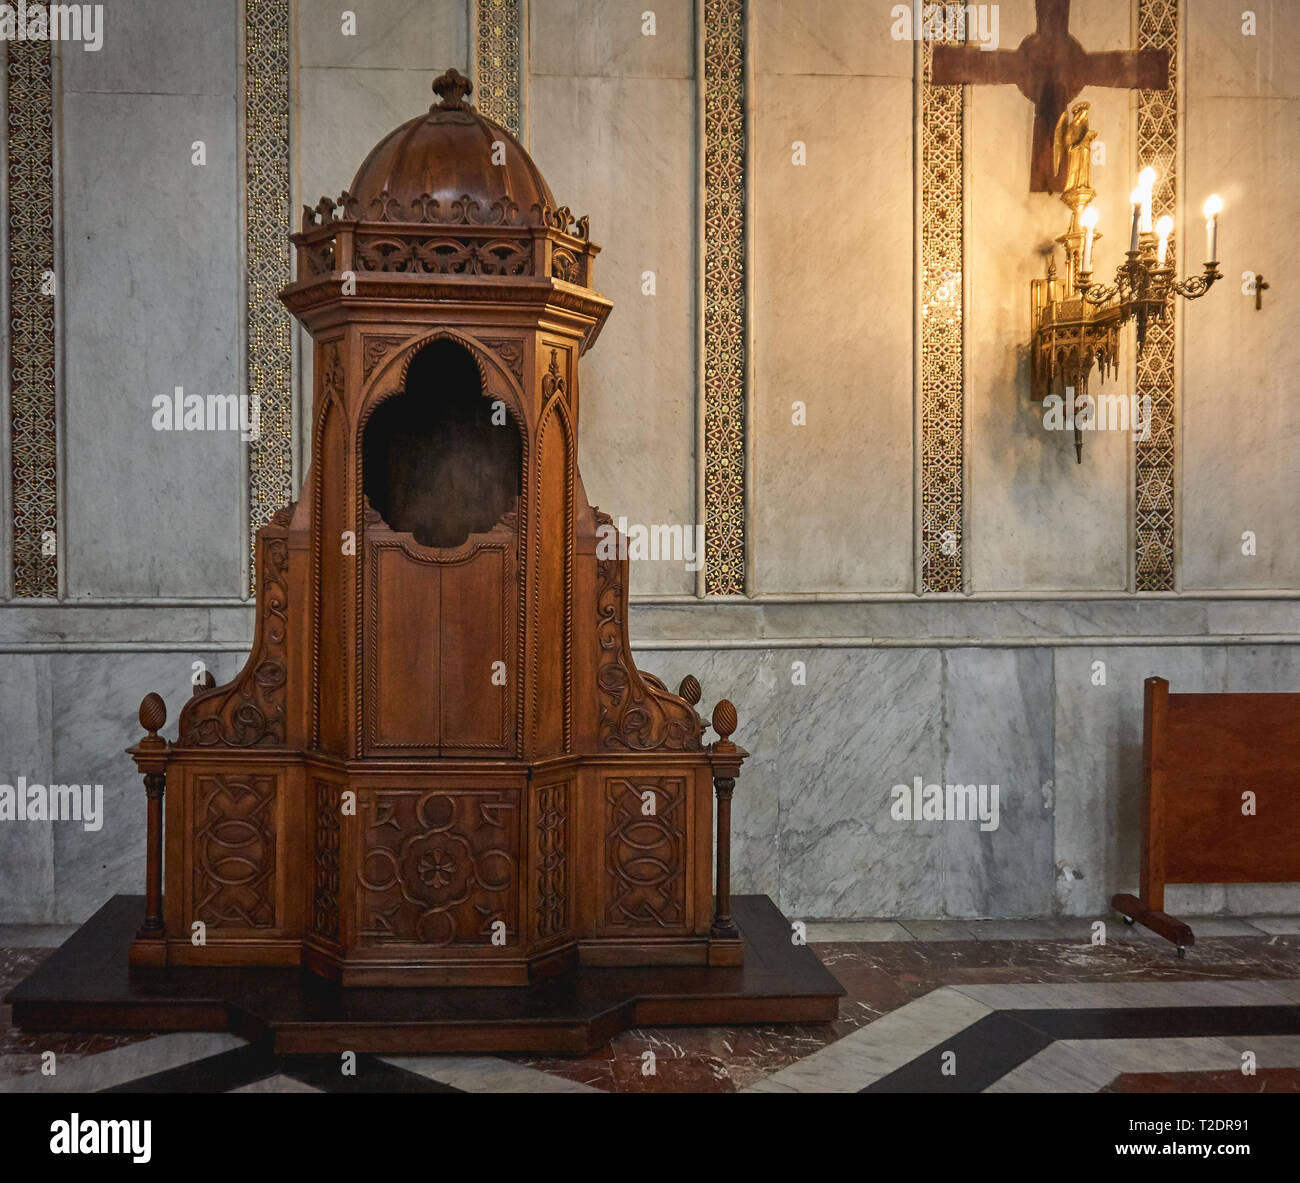 Monreale, Italy - October, 2018. A confessional booth inside the Cathedral, one of the greatest examples of Norman architecture. Stock Photo